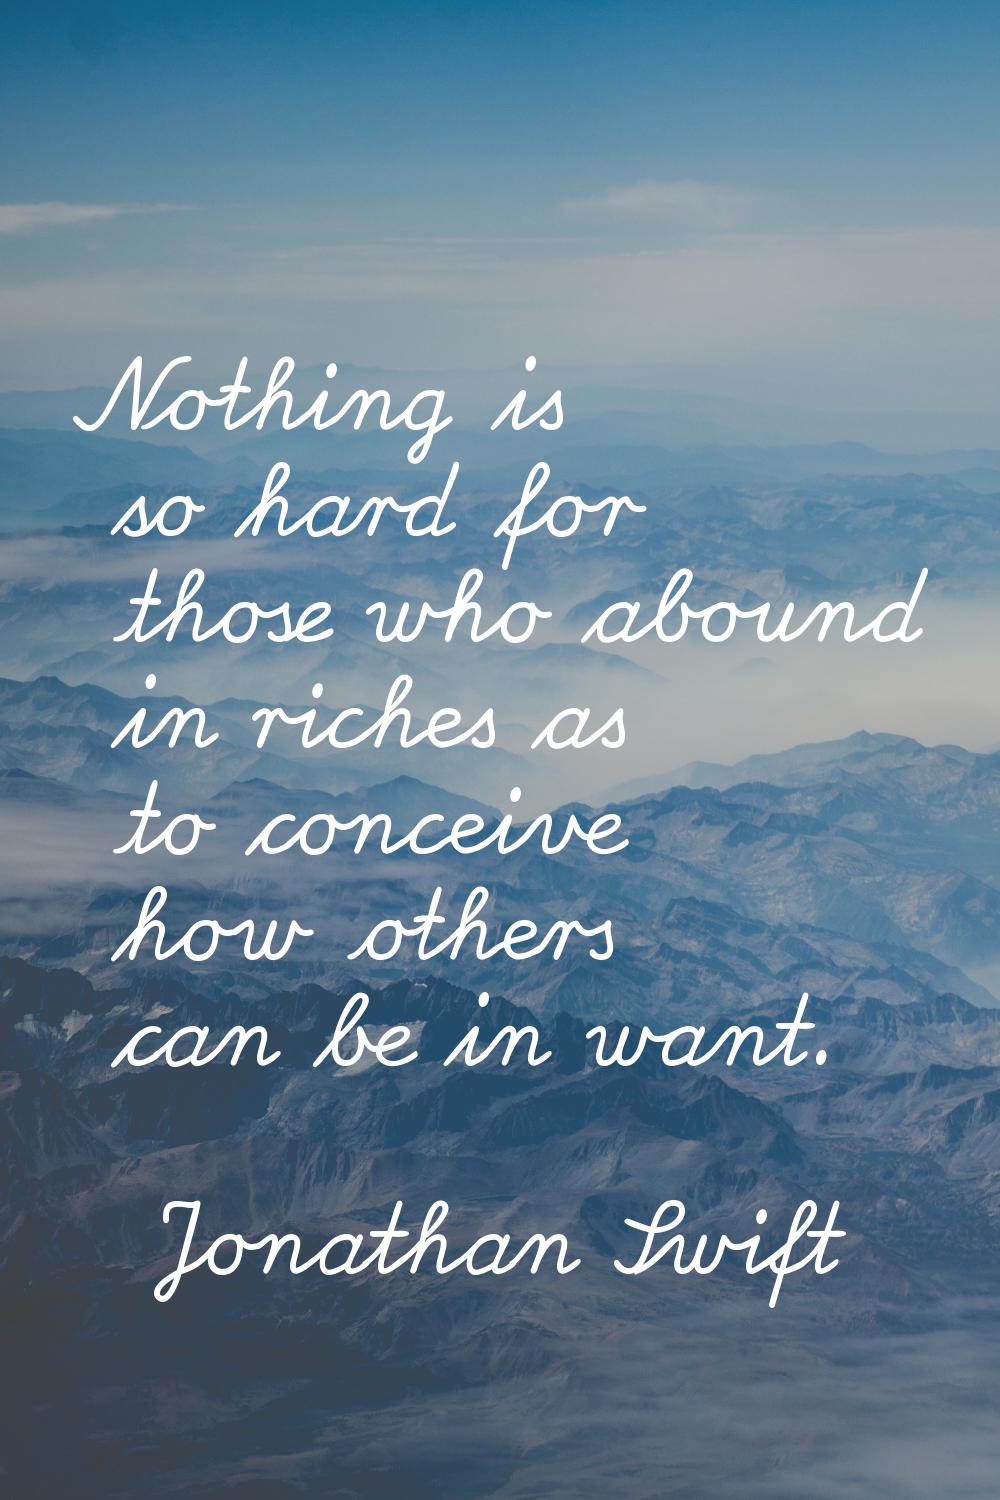 Nothing is so hard for those who abound in riches as to conceive how others can be in want.